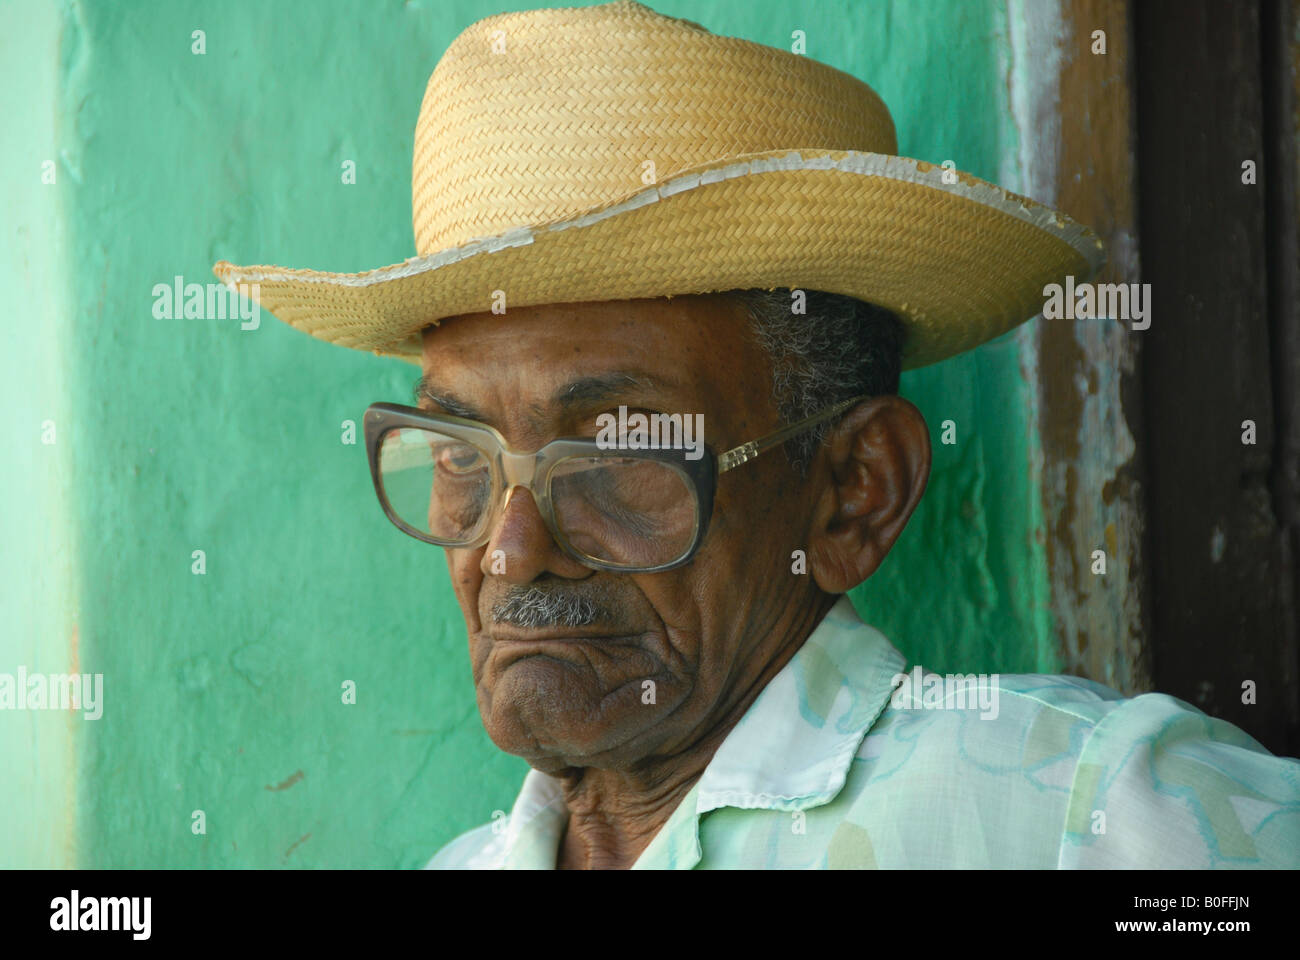 Portrait of an old Cuban man with glasses Stock Photo